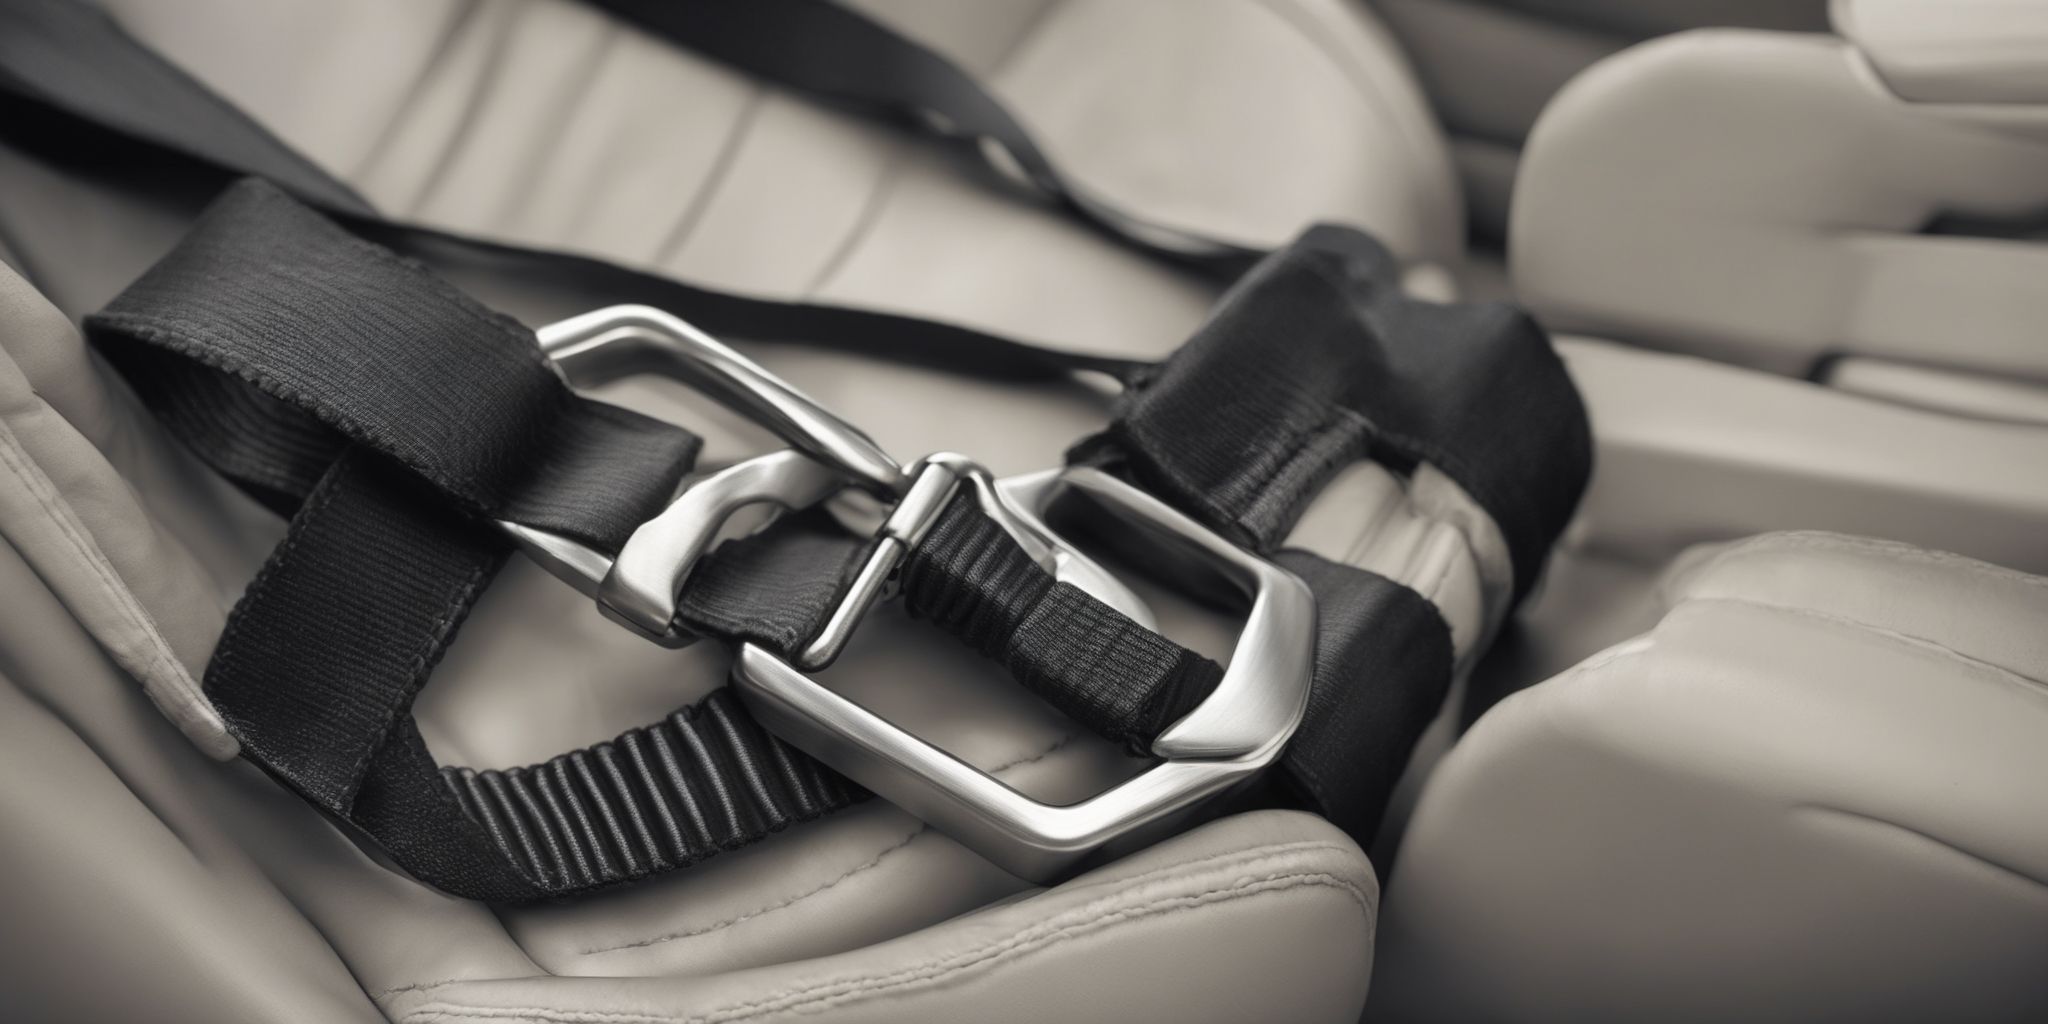 Low-risk: Seatbelt  in realistic, photographic style